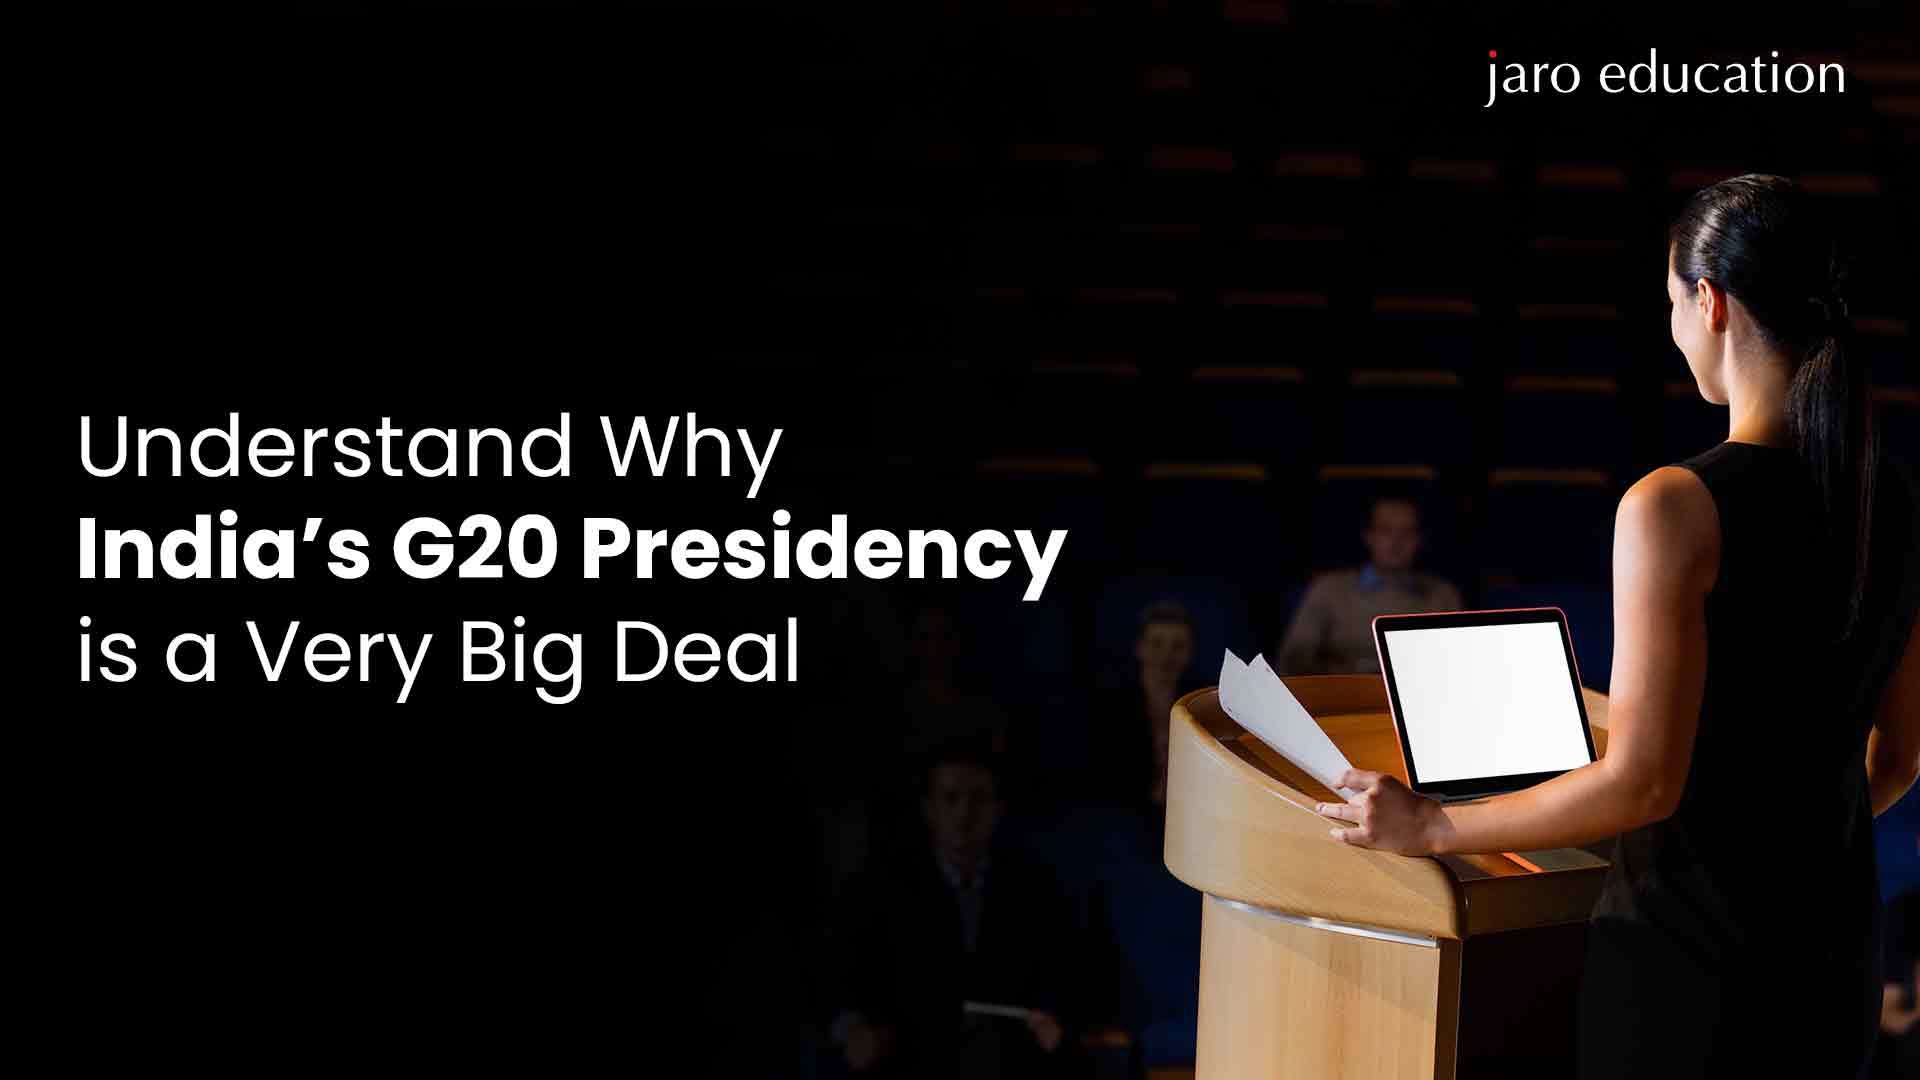 Understand-Why-India’s-G20-Presidency-is-a-Very-Big-Deal | jaro